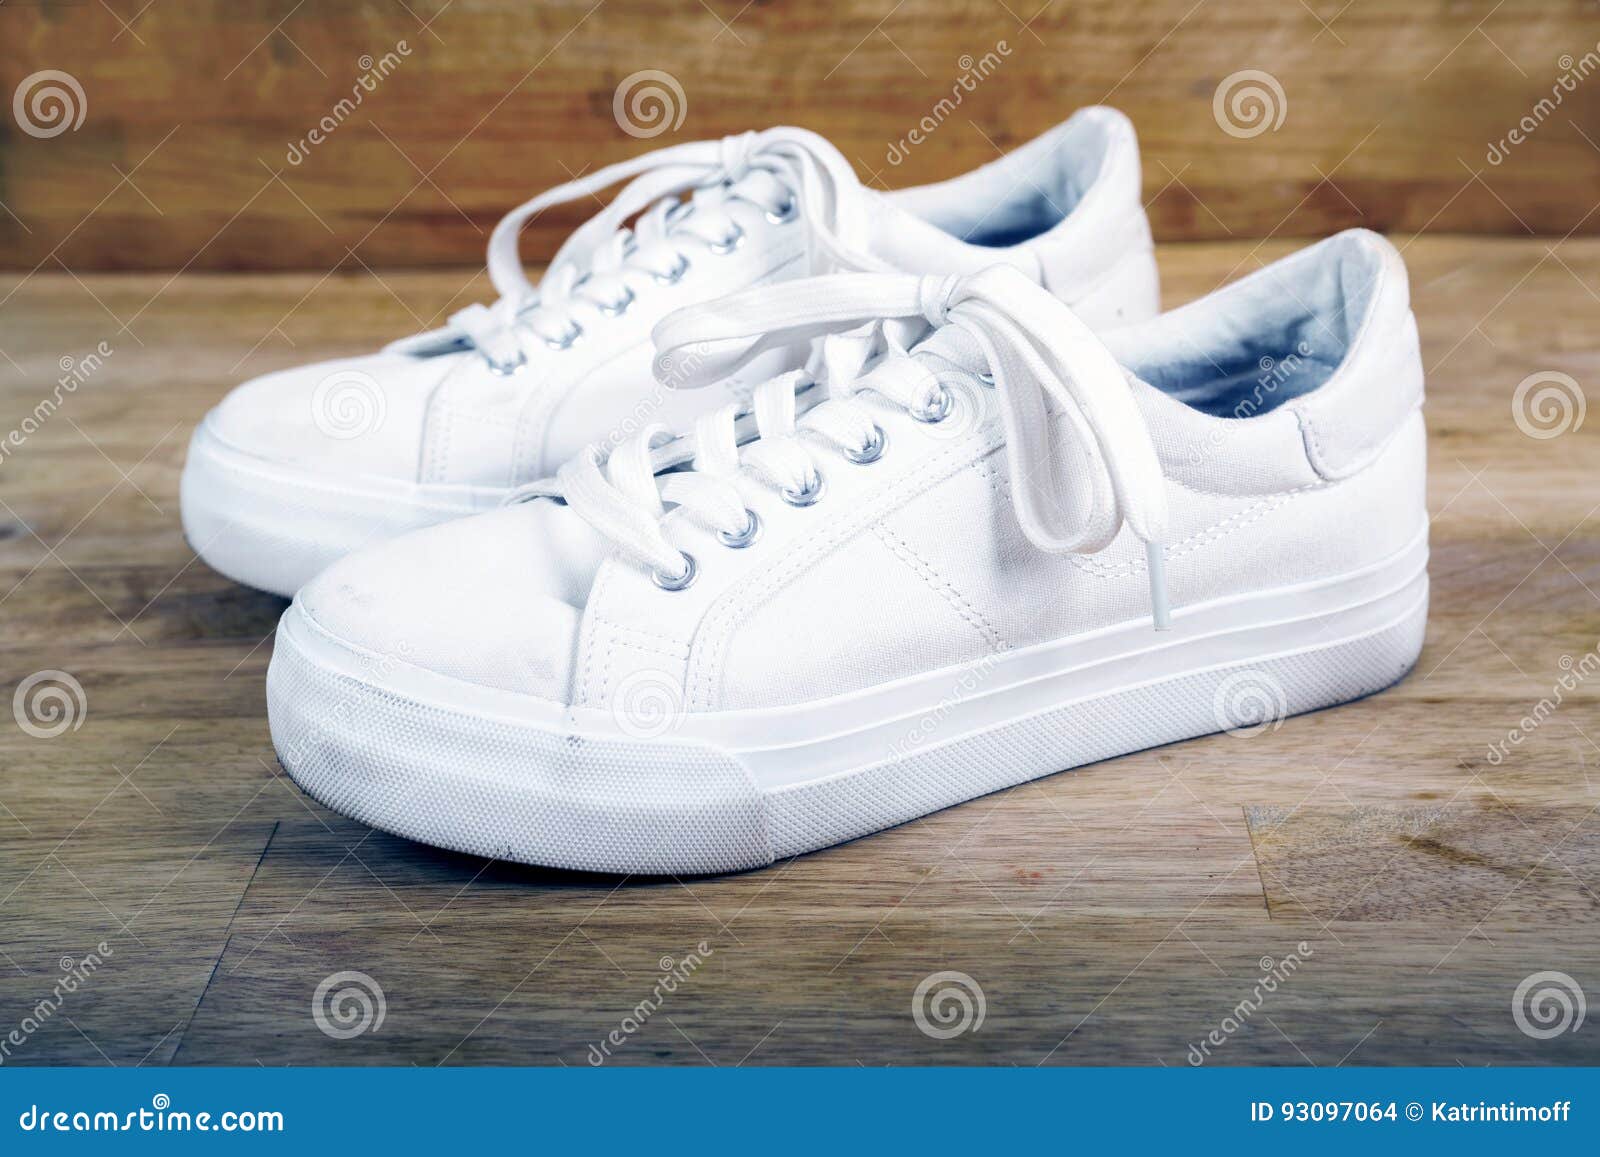 Pair of White Sneakers with Laces Stock Photo - Image of laces, close ...